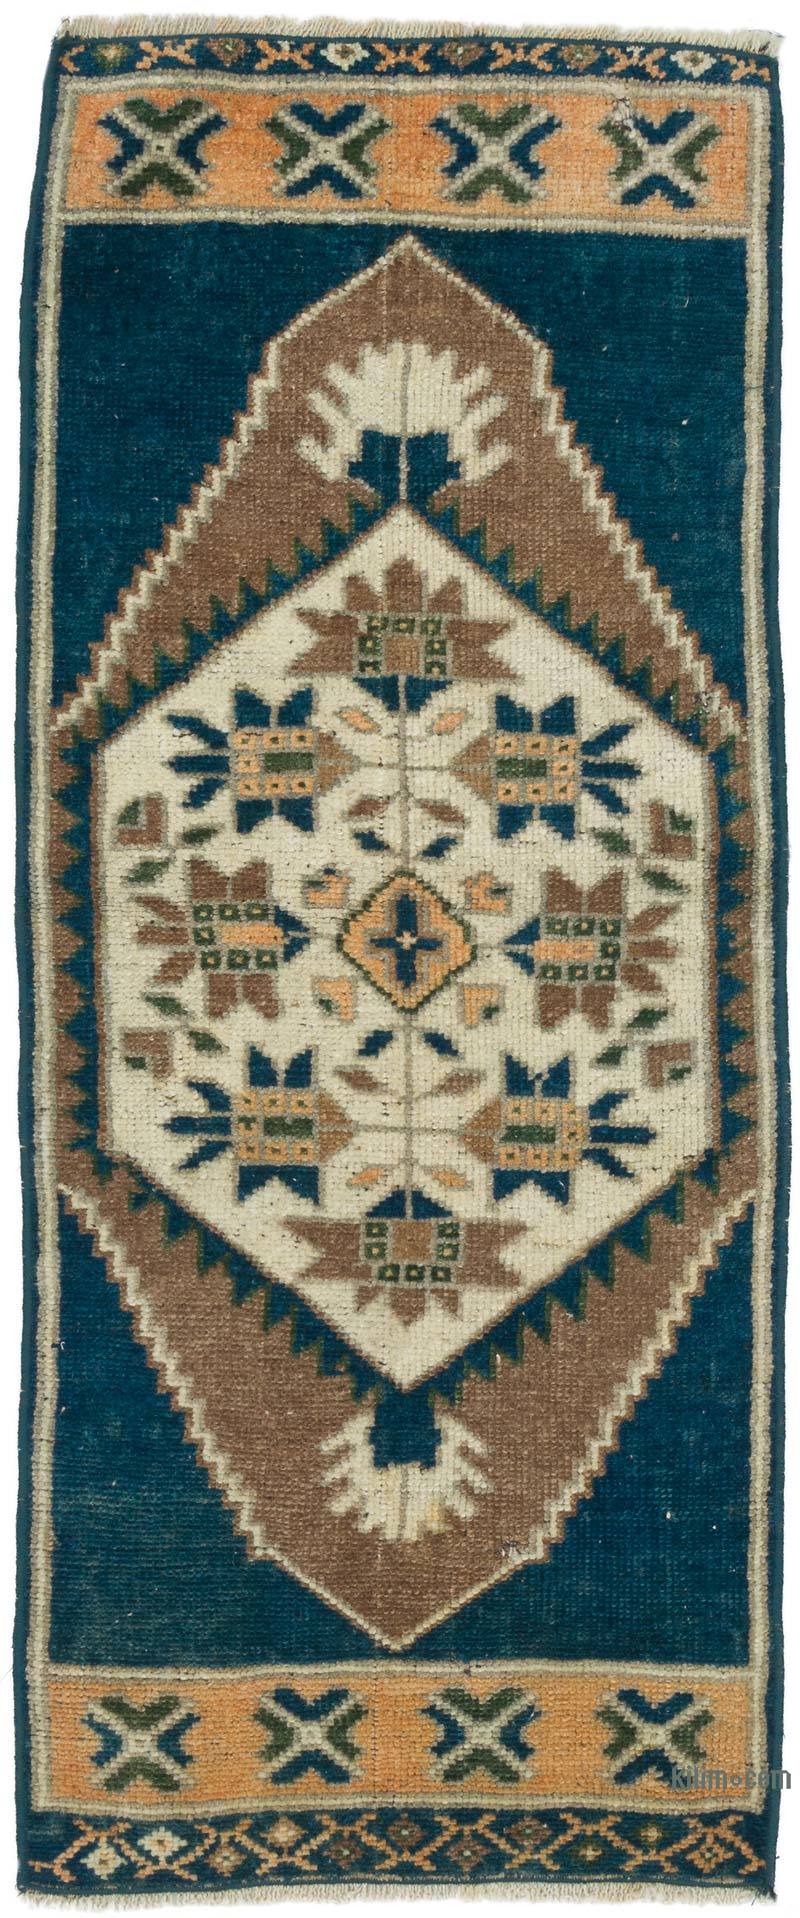 Vintage Turkish Hand-Knotted Rug - 1' 5" x 3' 4" (17 in. x 40 in.) - K0057734